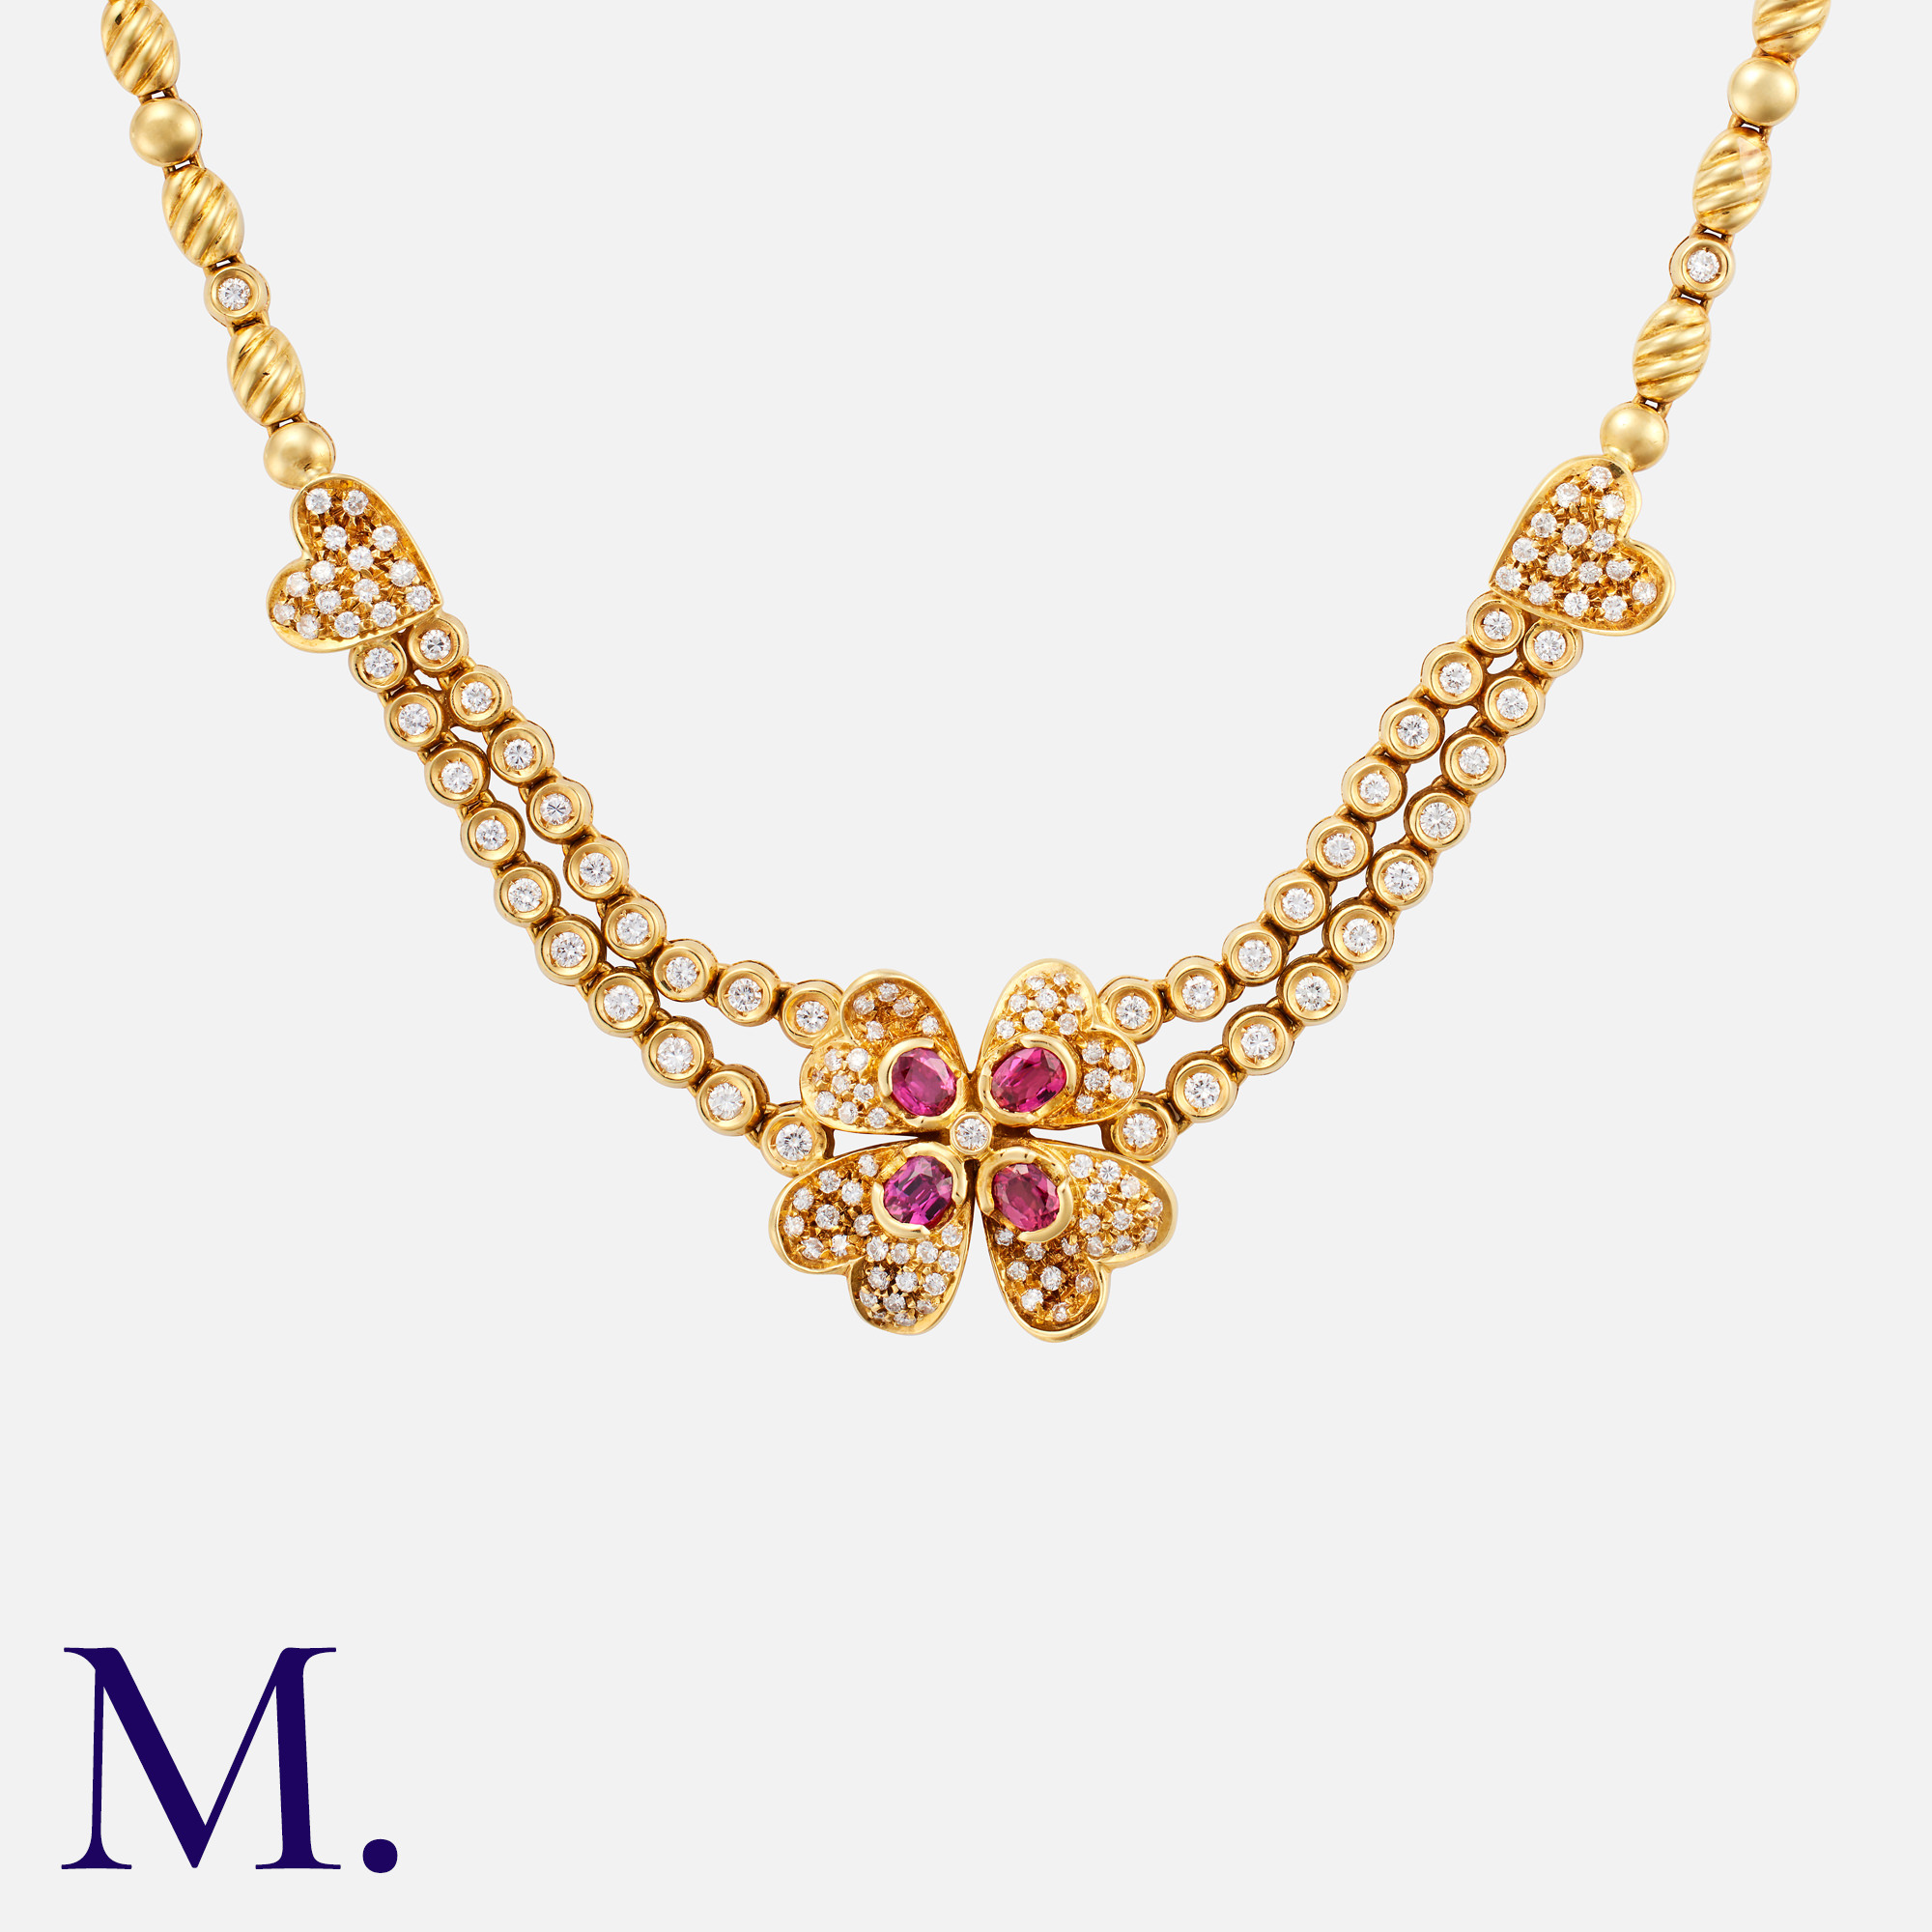 FRED. A Ruby and Diamond Collar in 18K yellow gold, set with four round cut rubies and diamonds in a - Image 2 of 2